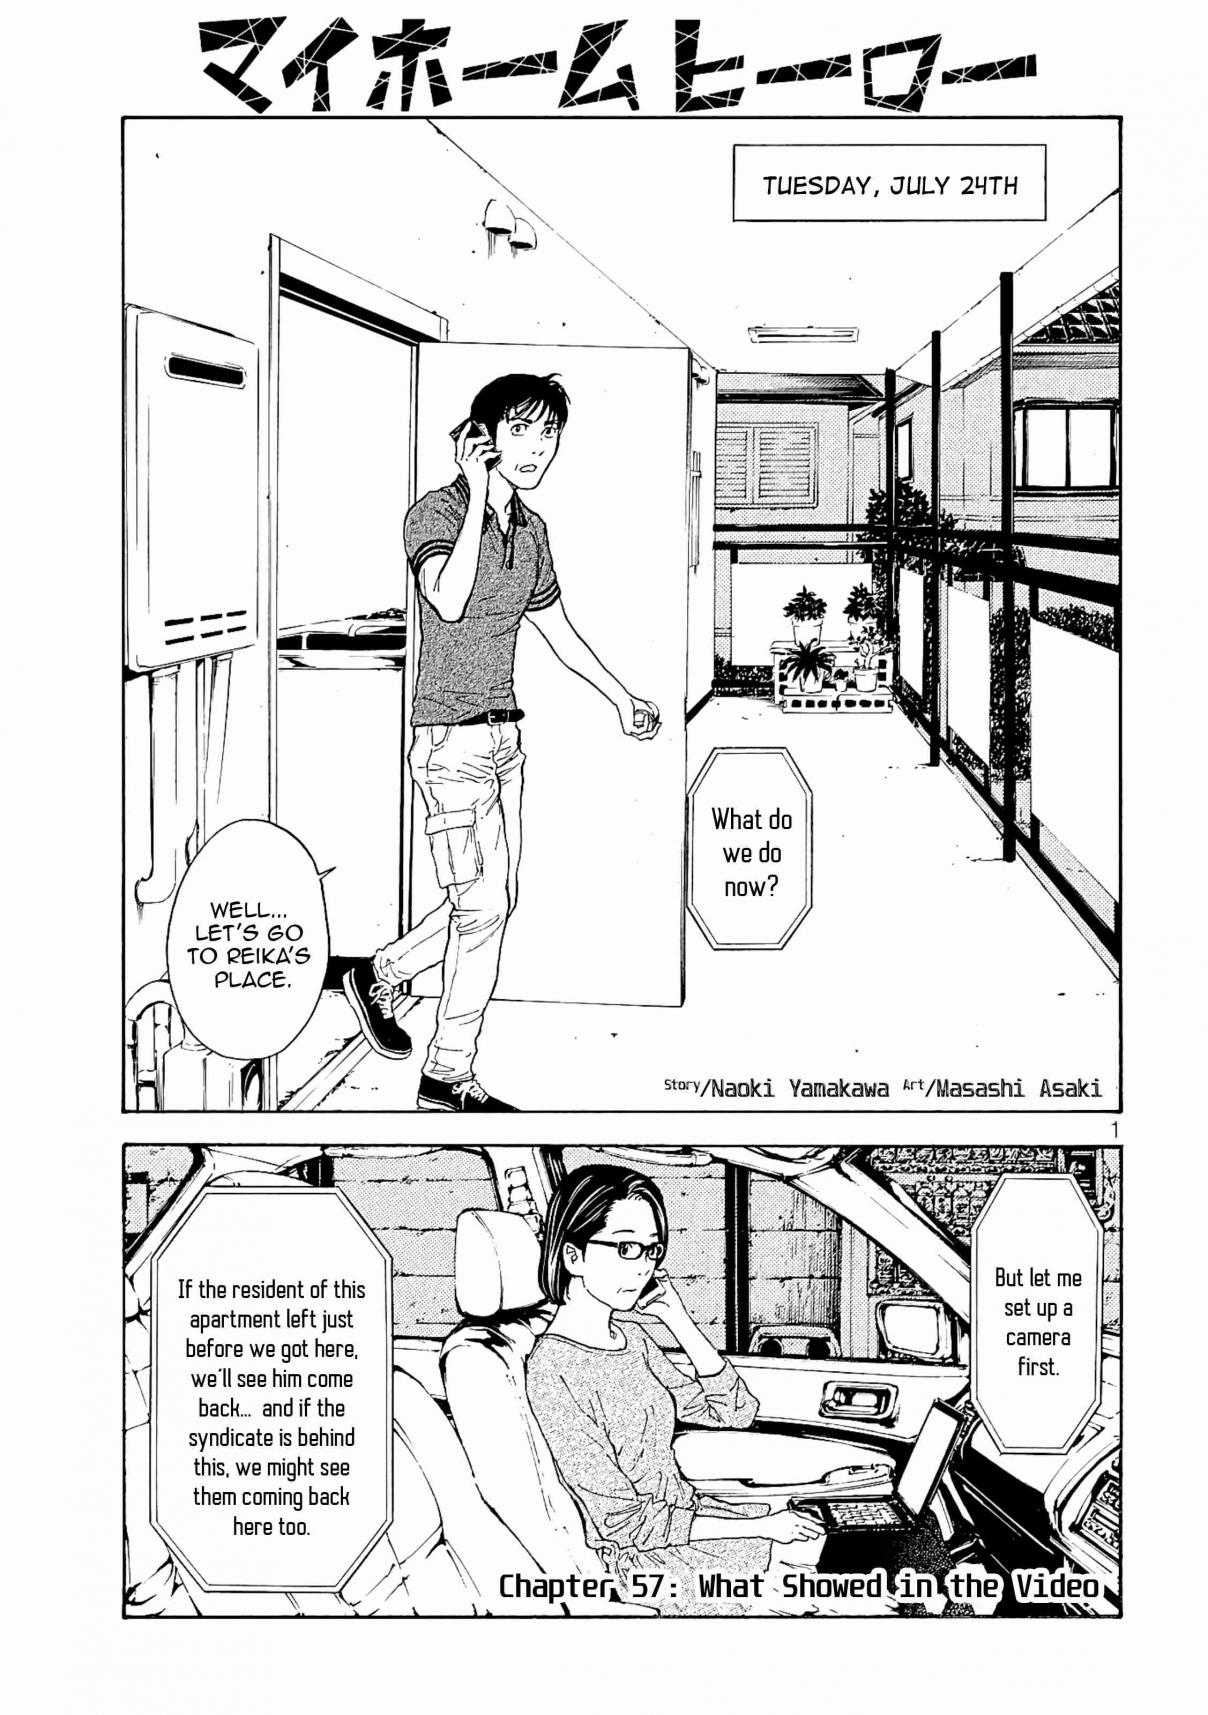 My Home Hero Vol. 7 Ch. 57 What Showed in the Video